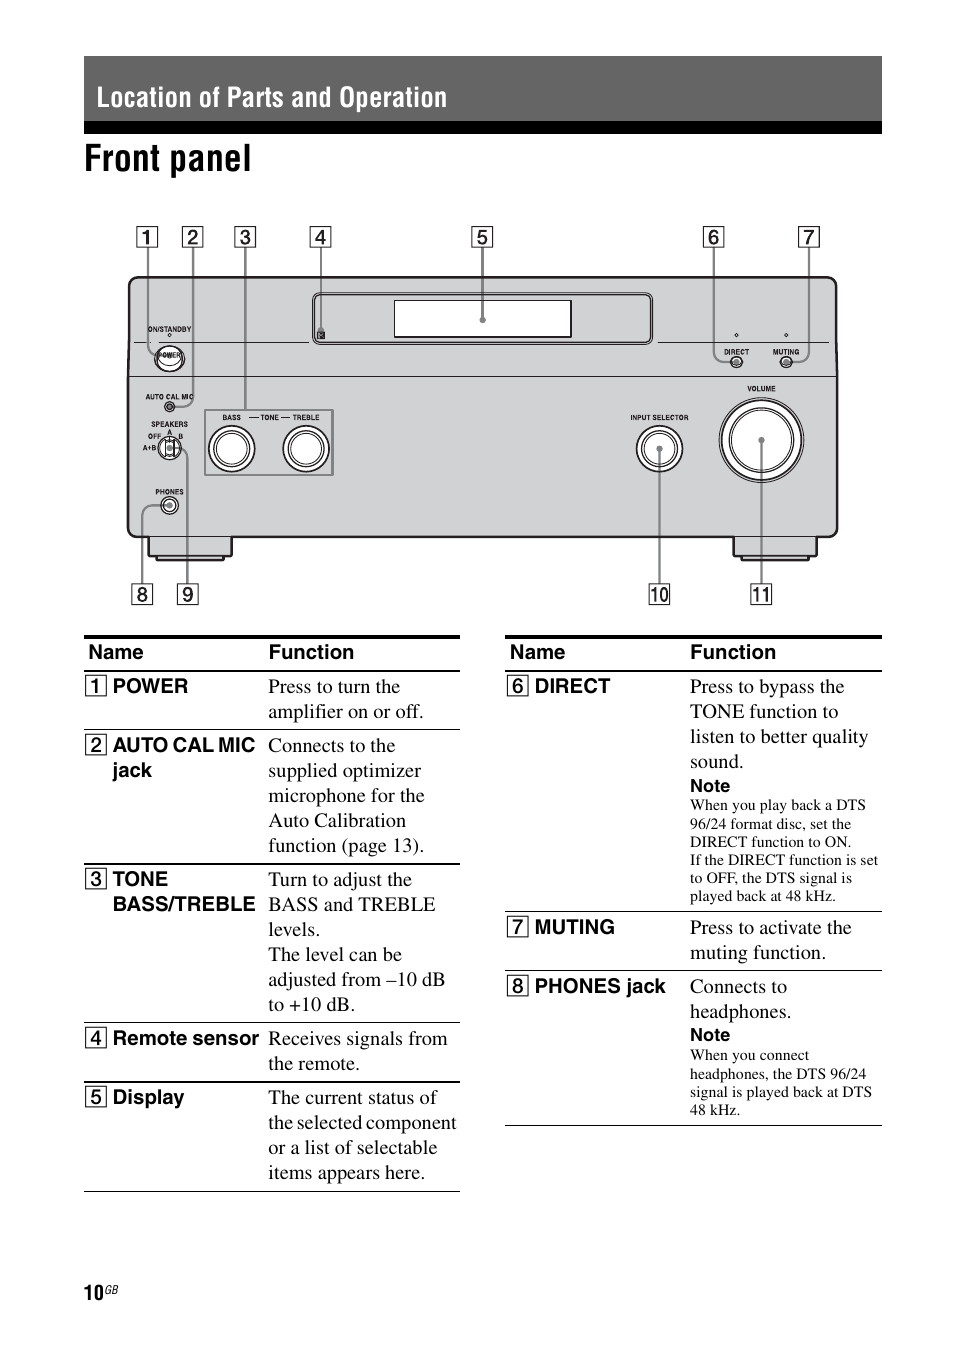 Location of parts and operation, Front panel | Sony TA-FA1200ES User Manual | Page 10 / 91